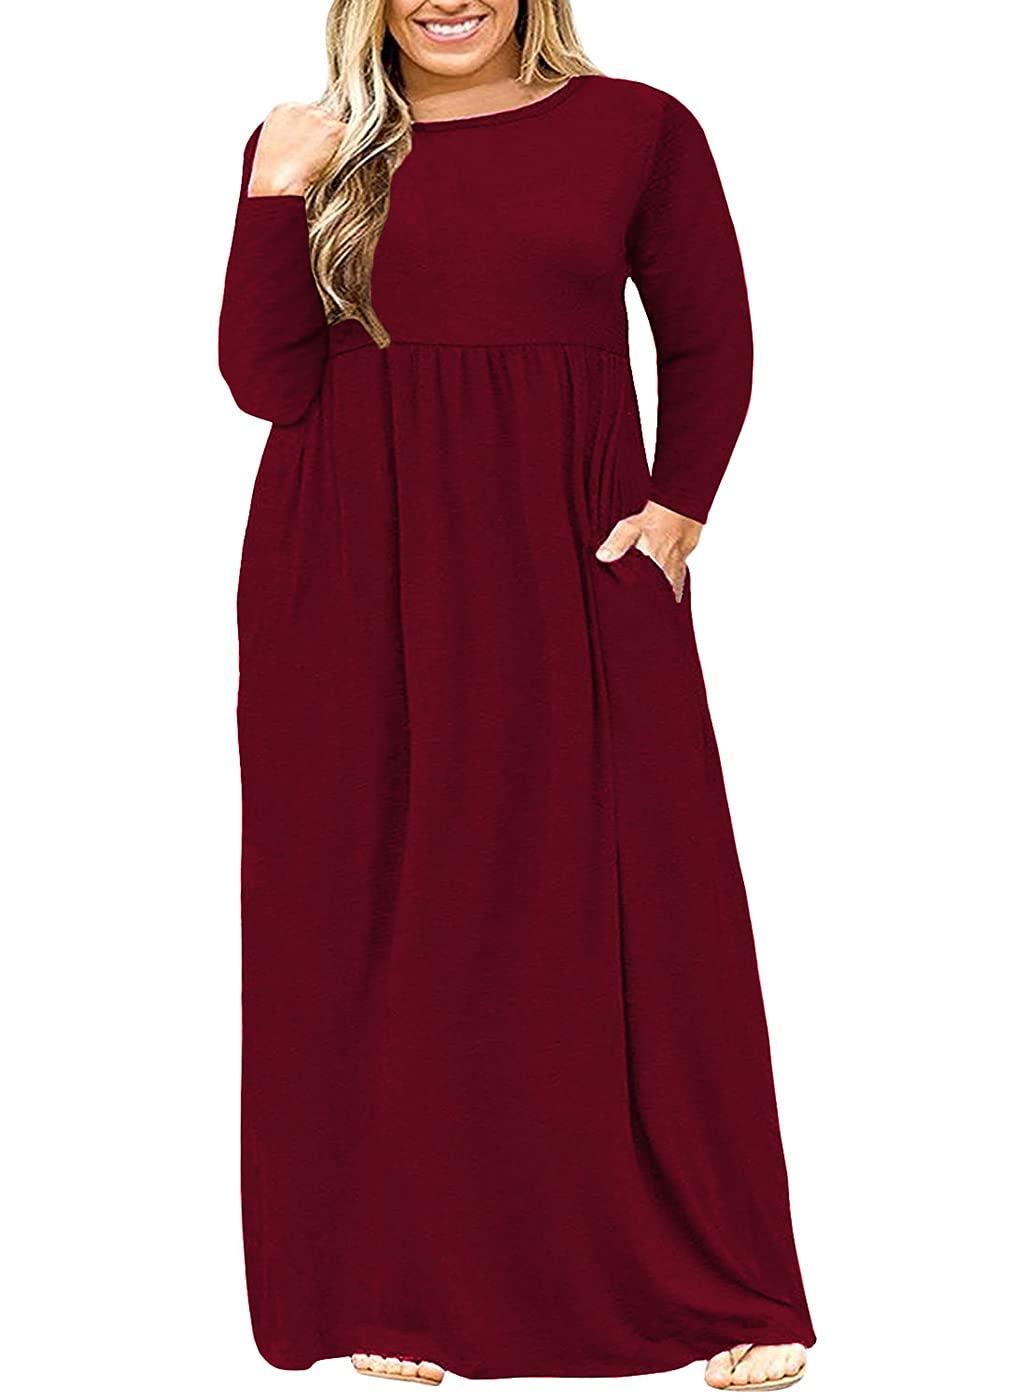 BISHUIGE Womens XL-6XL Long Sleeve Casual Plus Size Maxi Dresses with Pockets